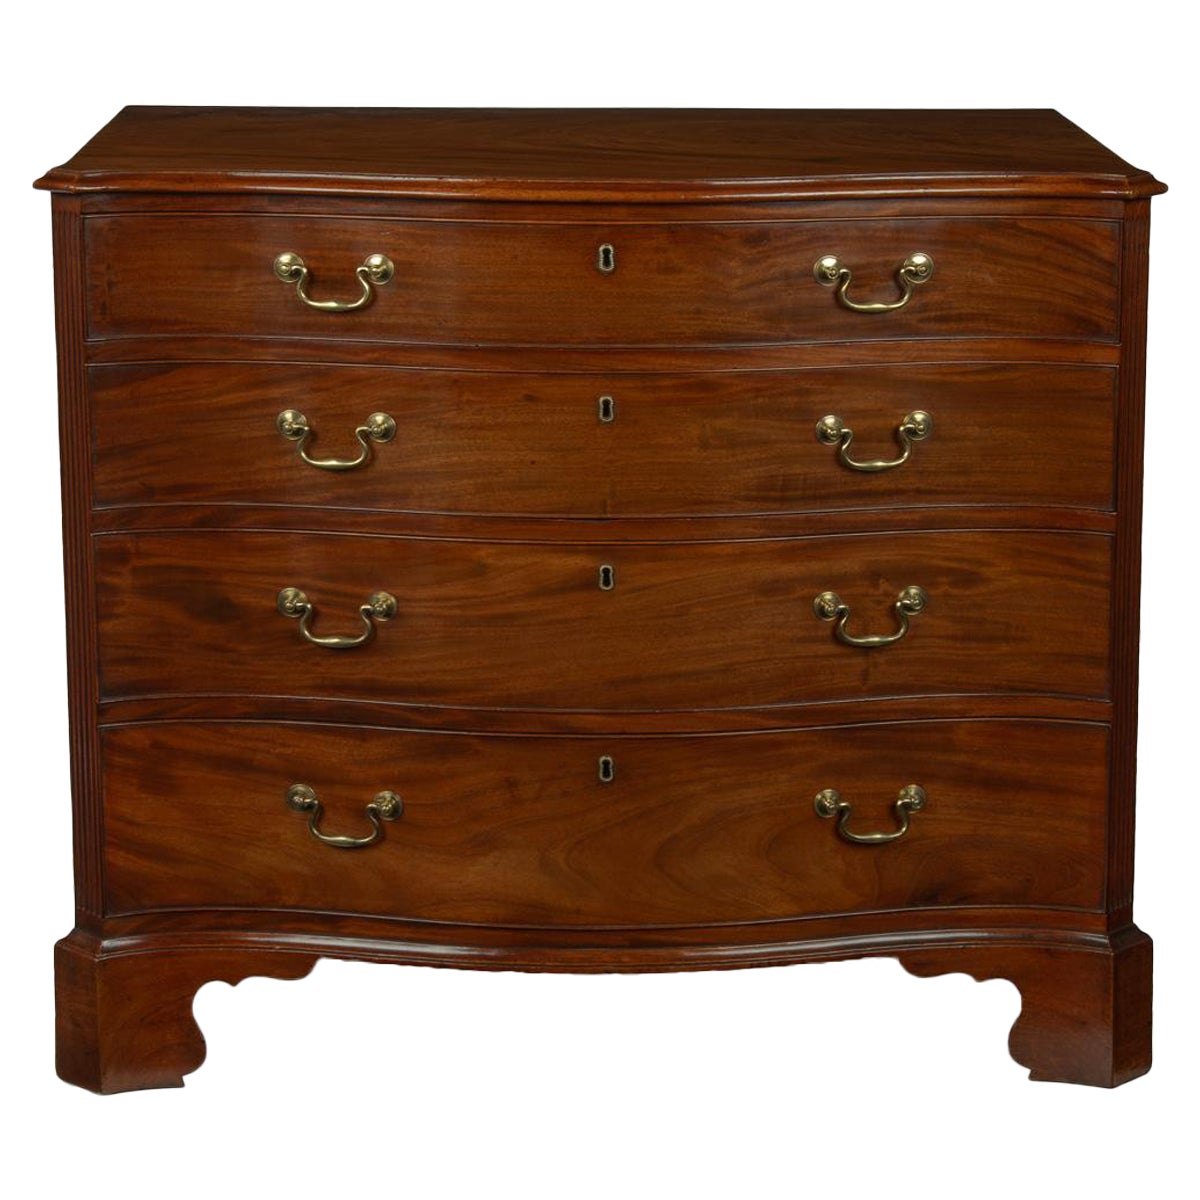 A mahogany four-drawer serpentine chest of drawers For Sale